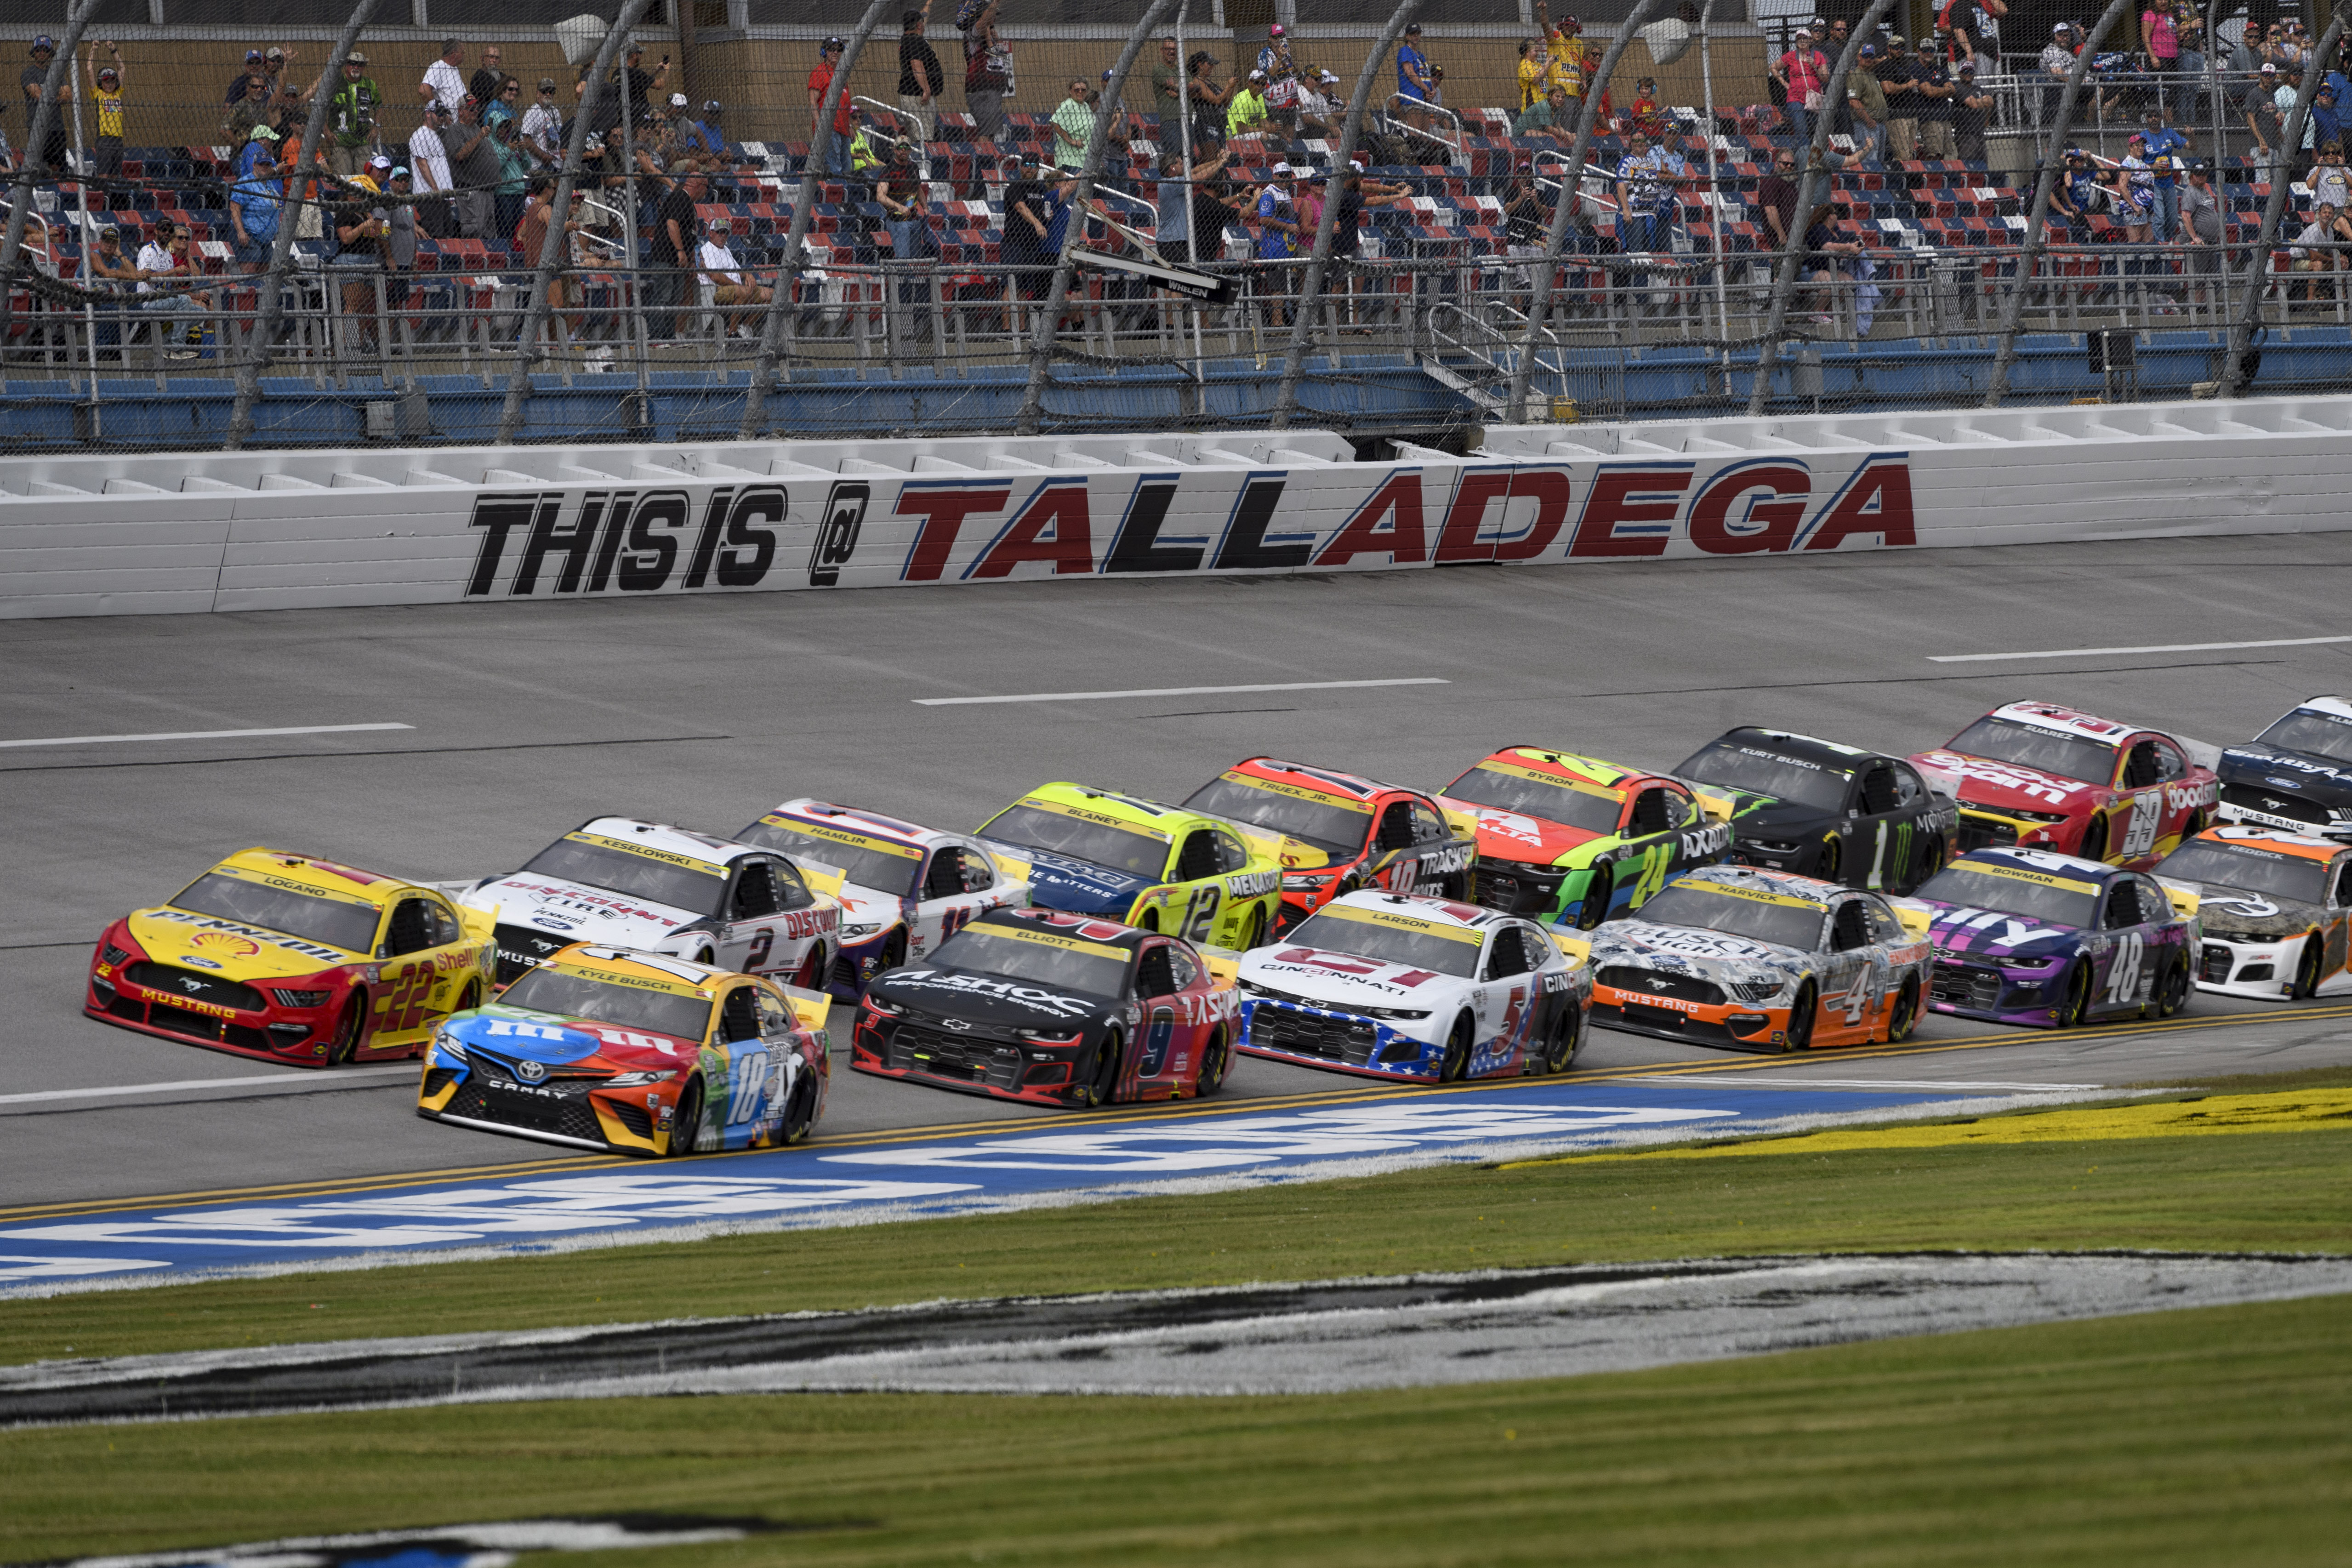 Geico 500 at Talladega - NASCAR (4/24/22) How to Watch, Start Time, Preview